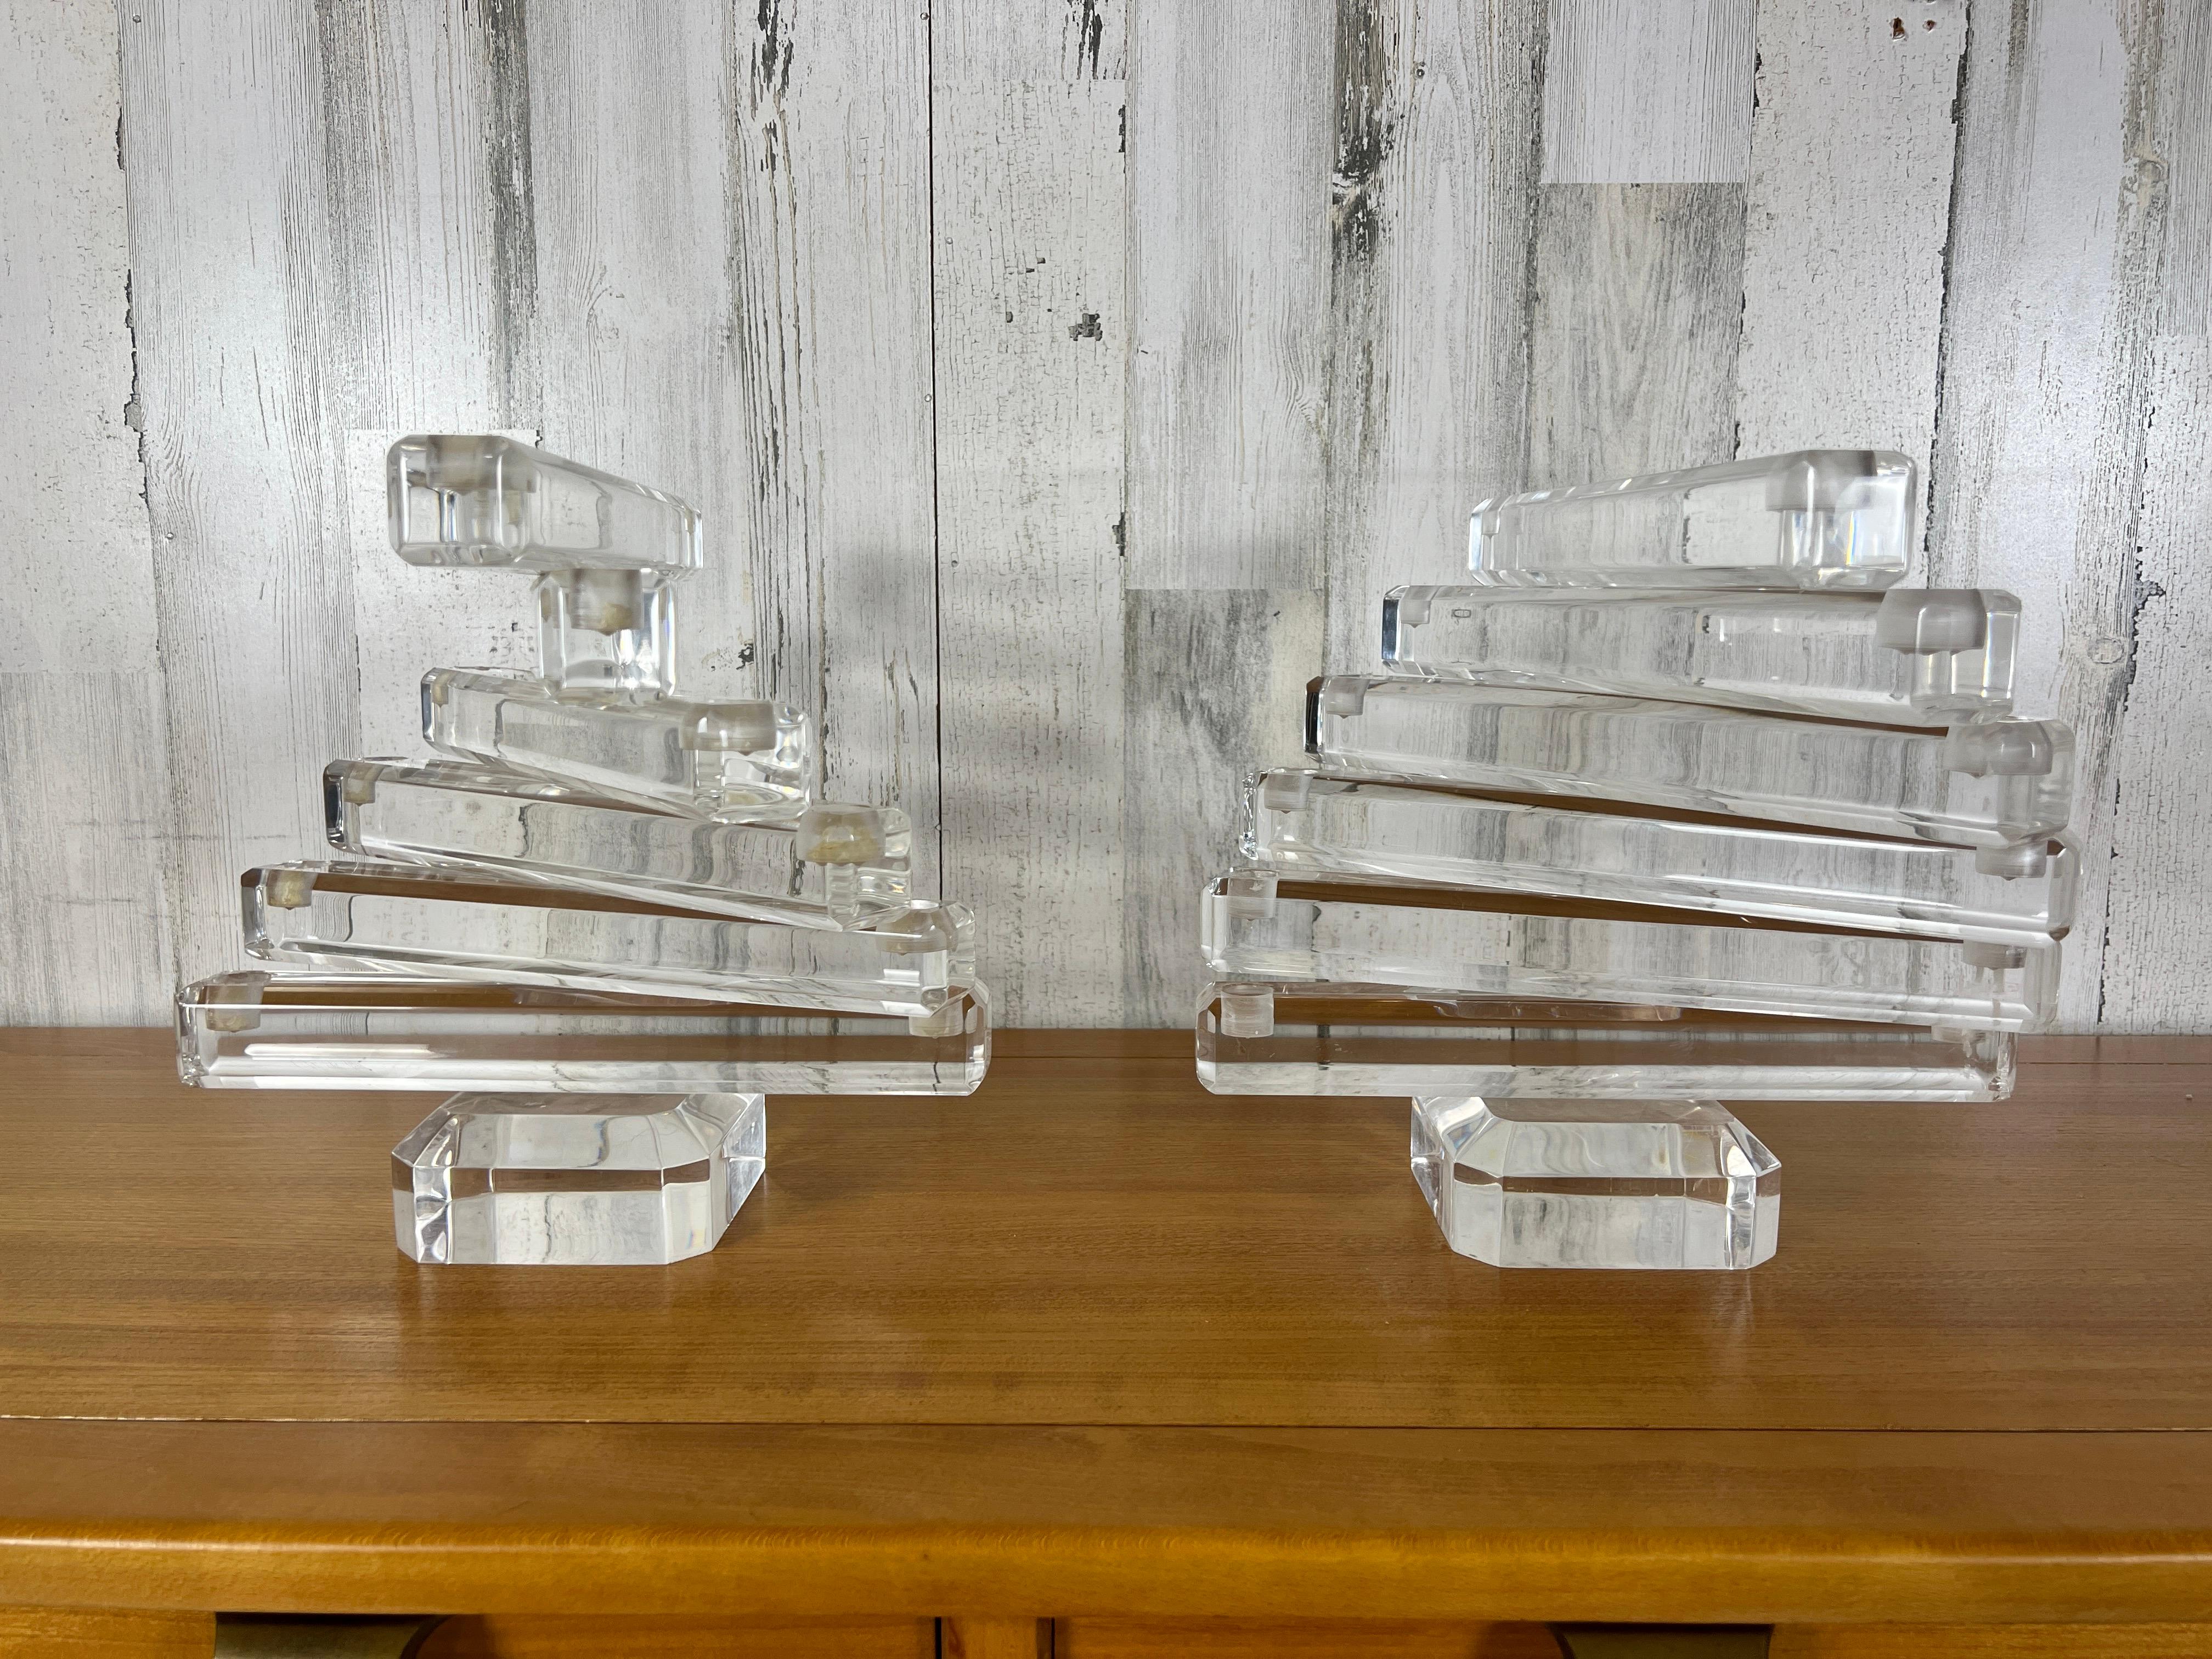 Mesmerizing stacked spiral lucite candelabras. Can be used property as candelabras or as decorative objects.